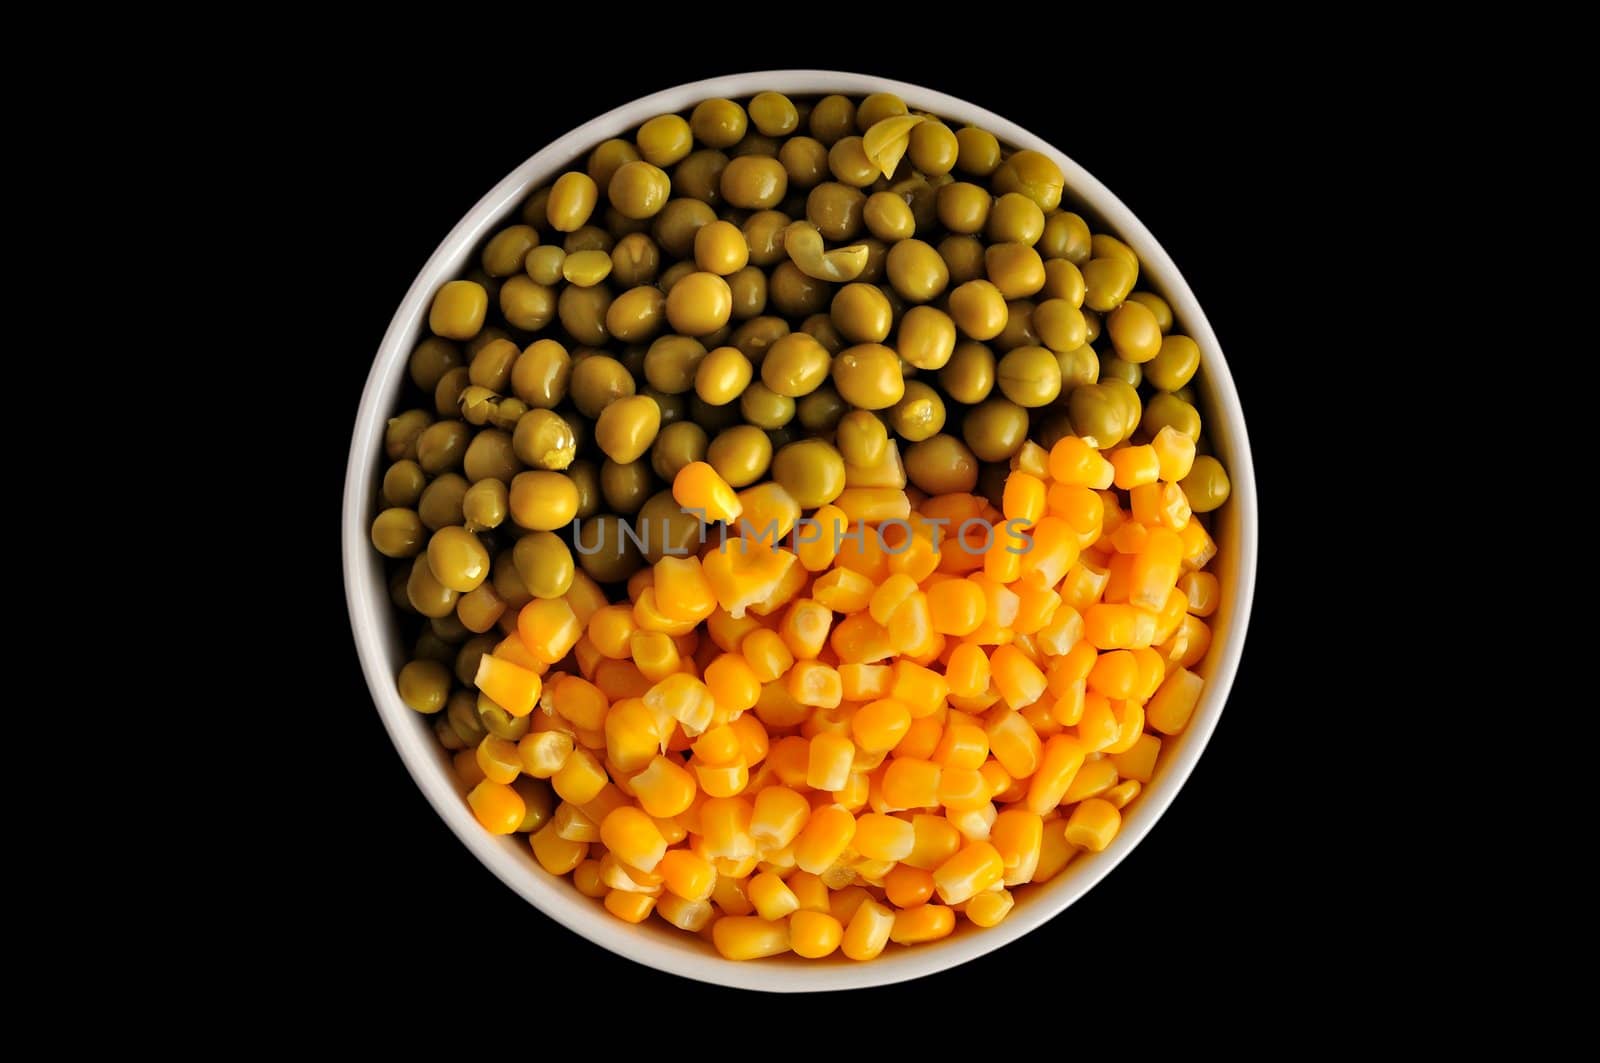 a plate with corn and peas, isolated, on a black background